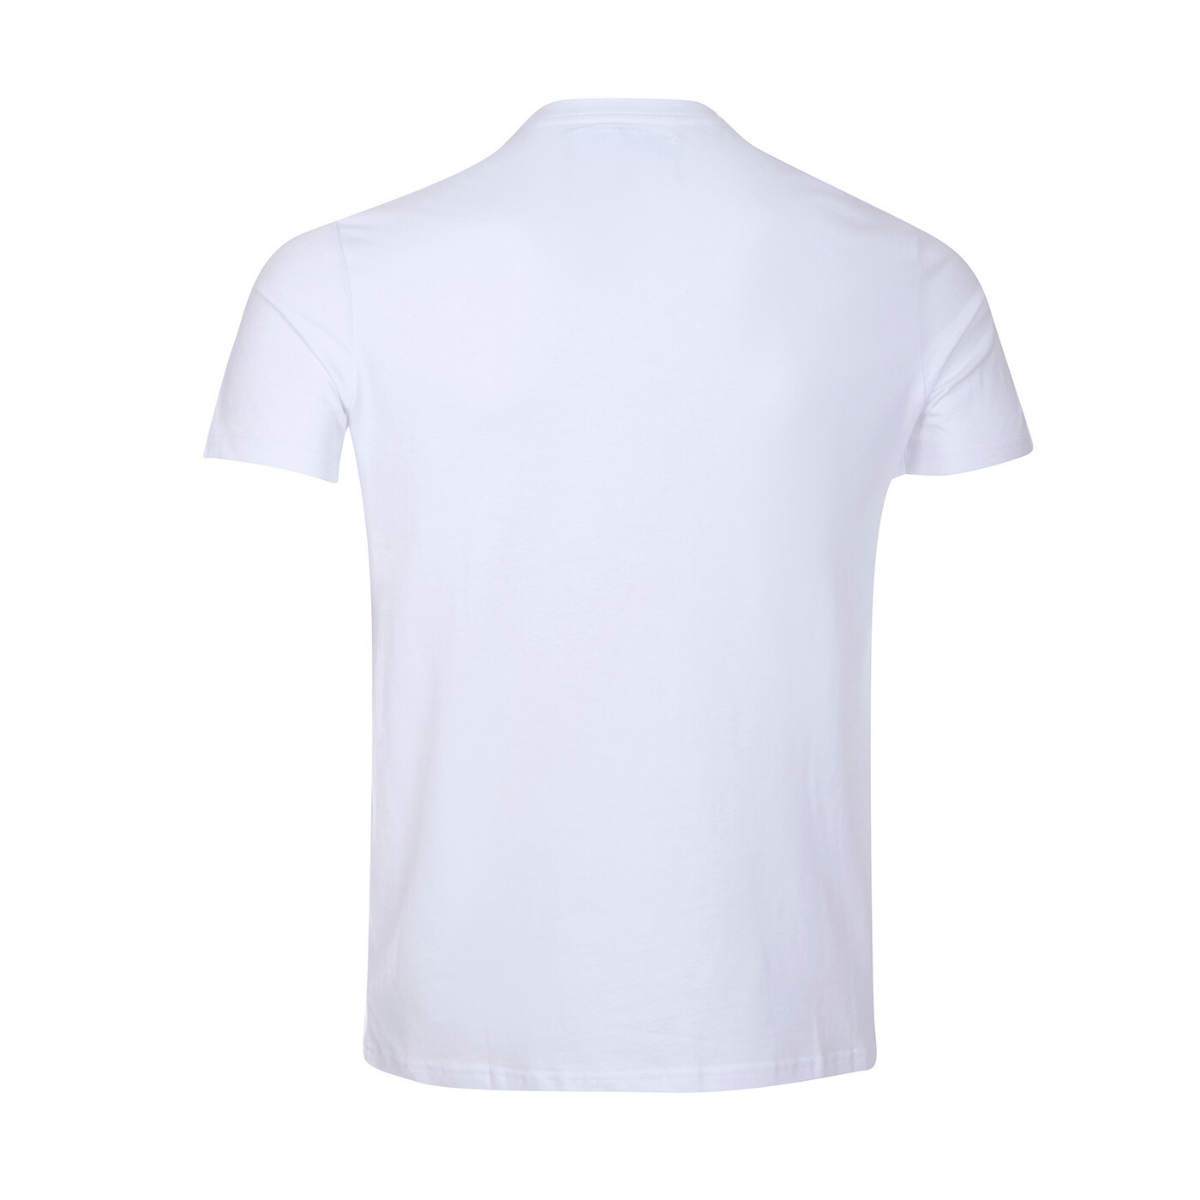 White T-shirt | Lolly to Make You Jolly